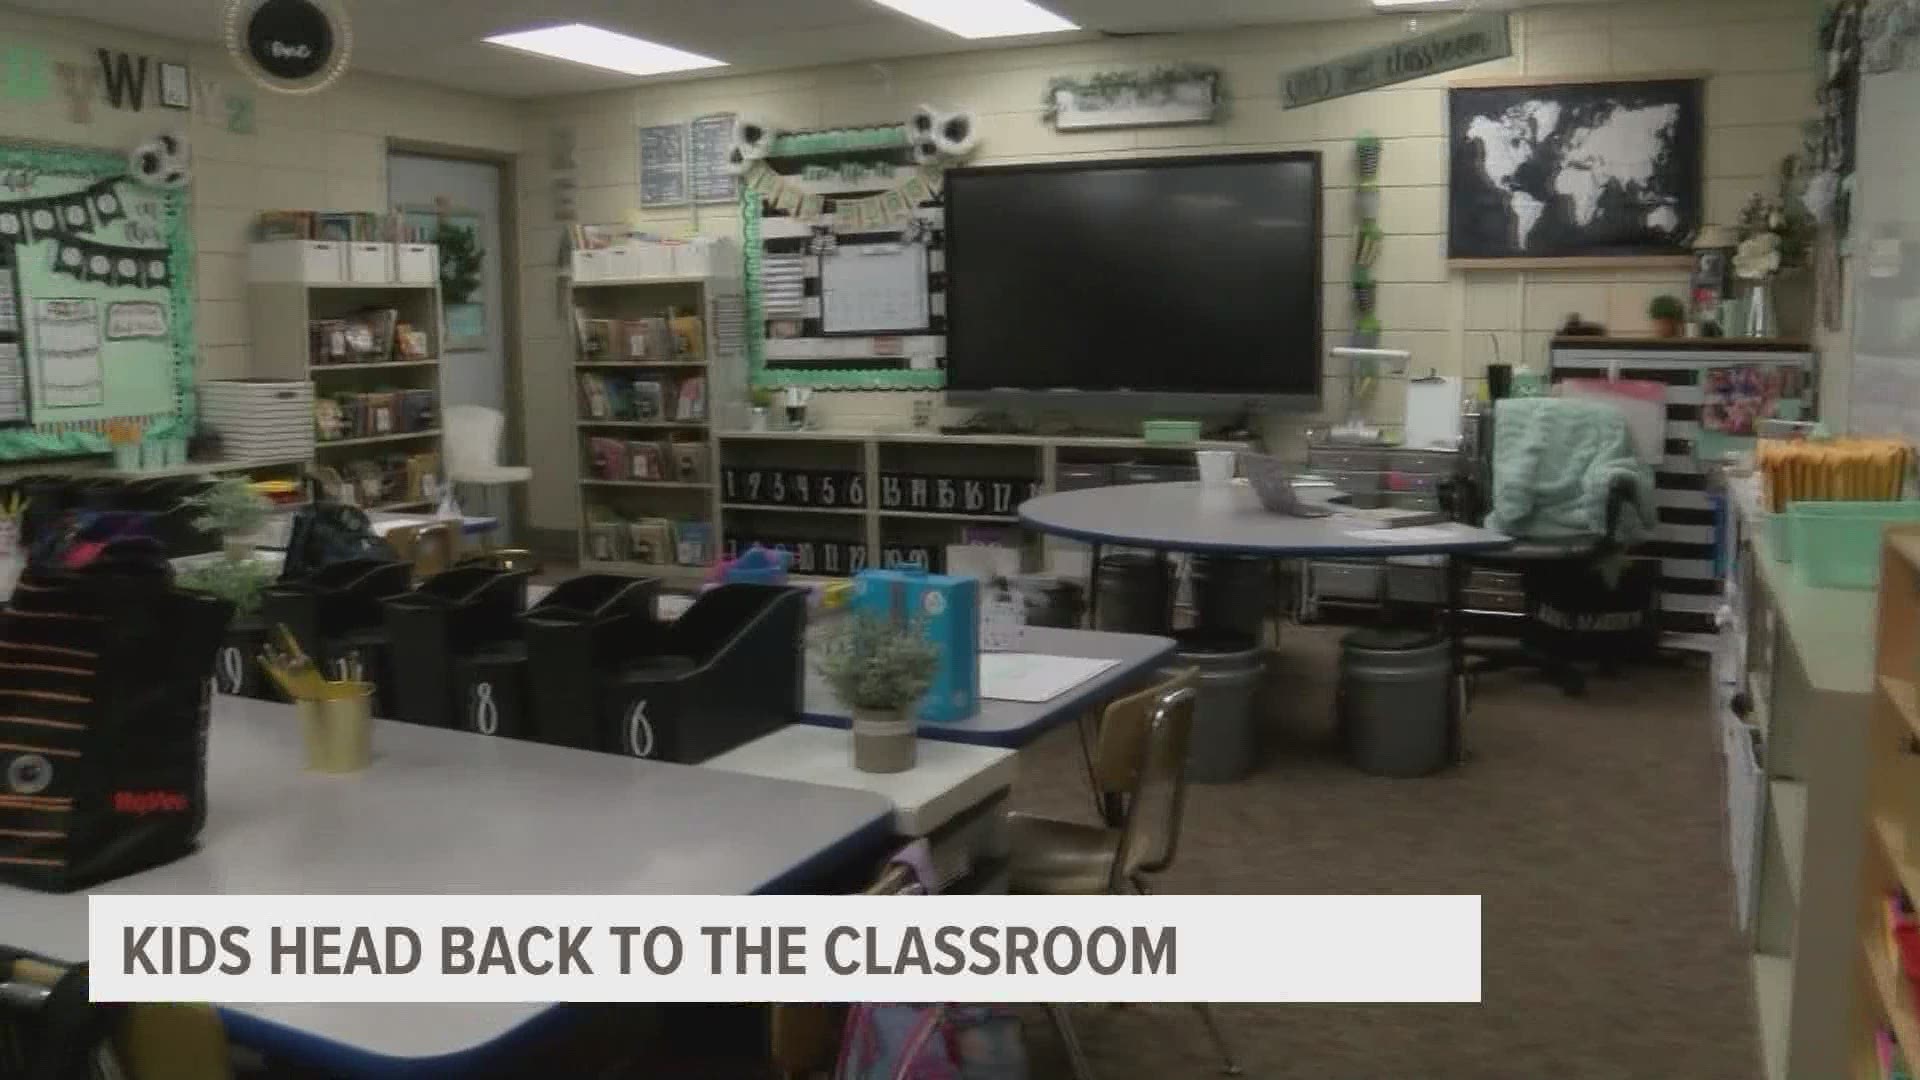 The Urbandale school is the first in the district to begin its school year on Thursday.